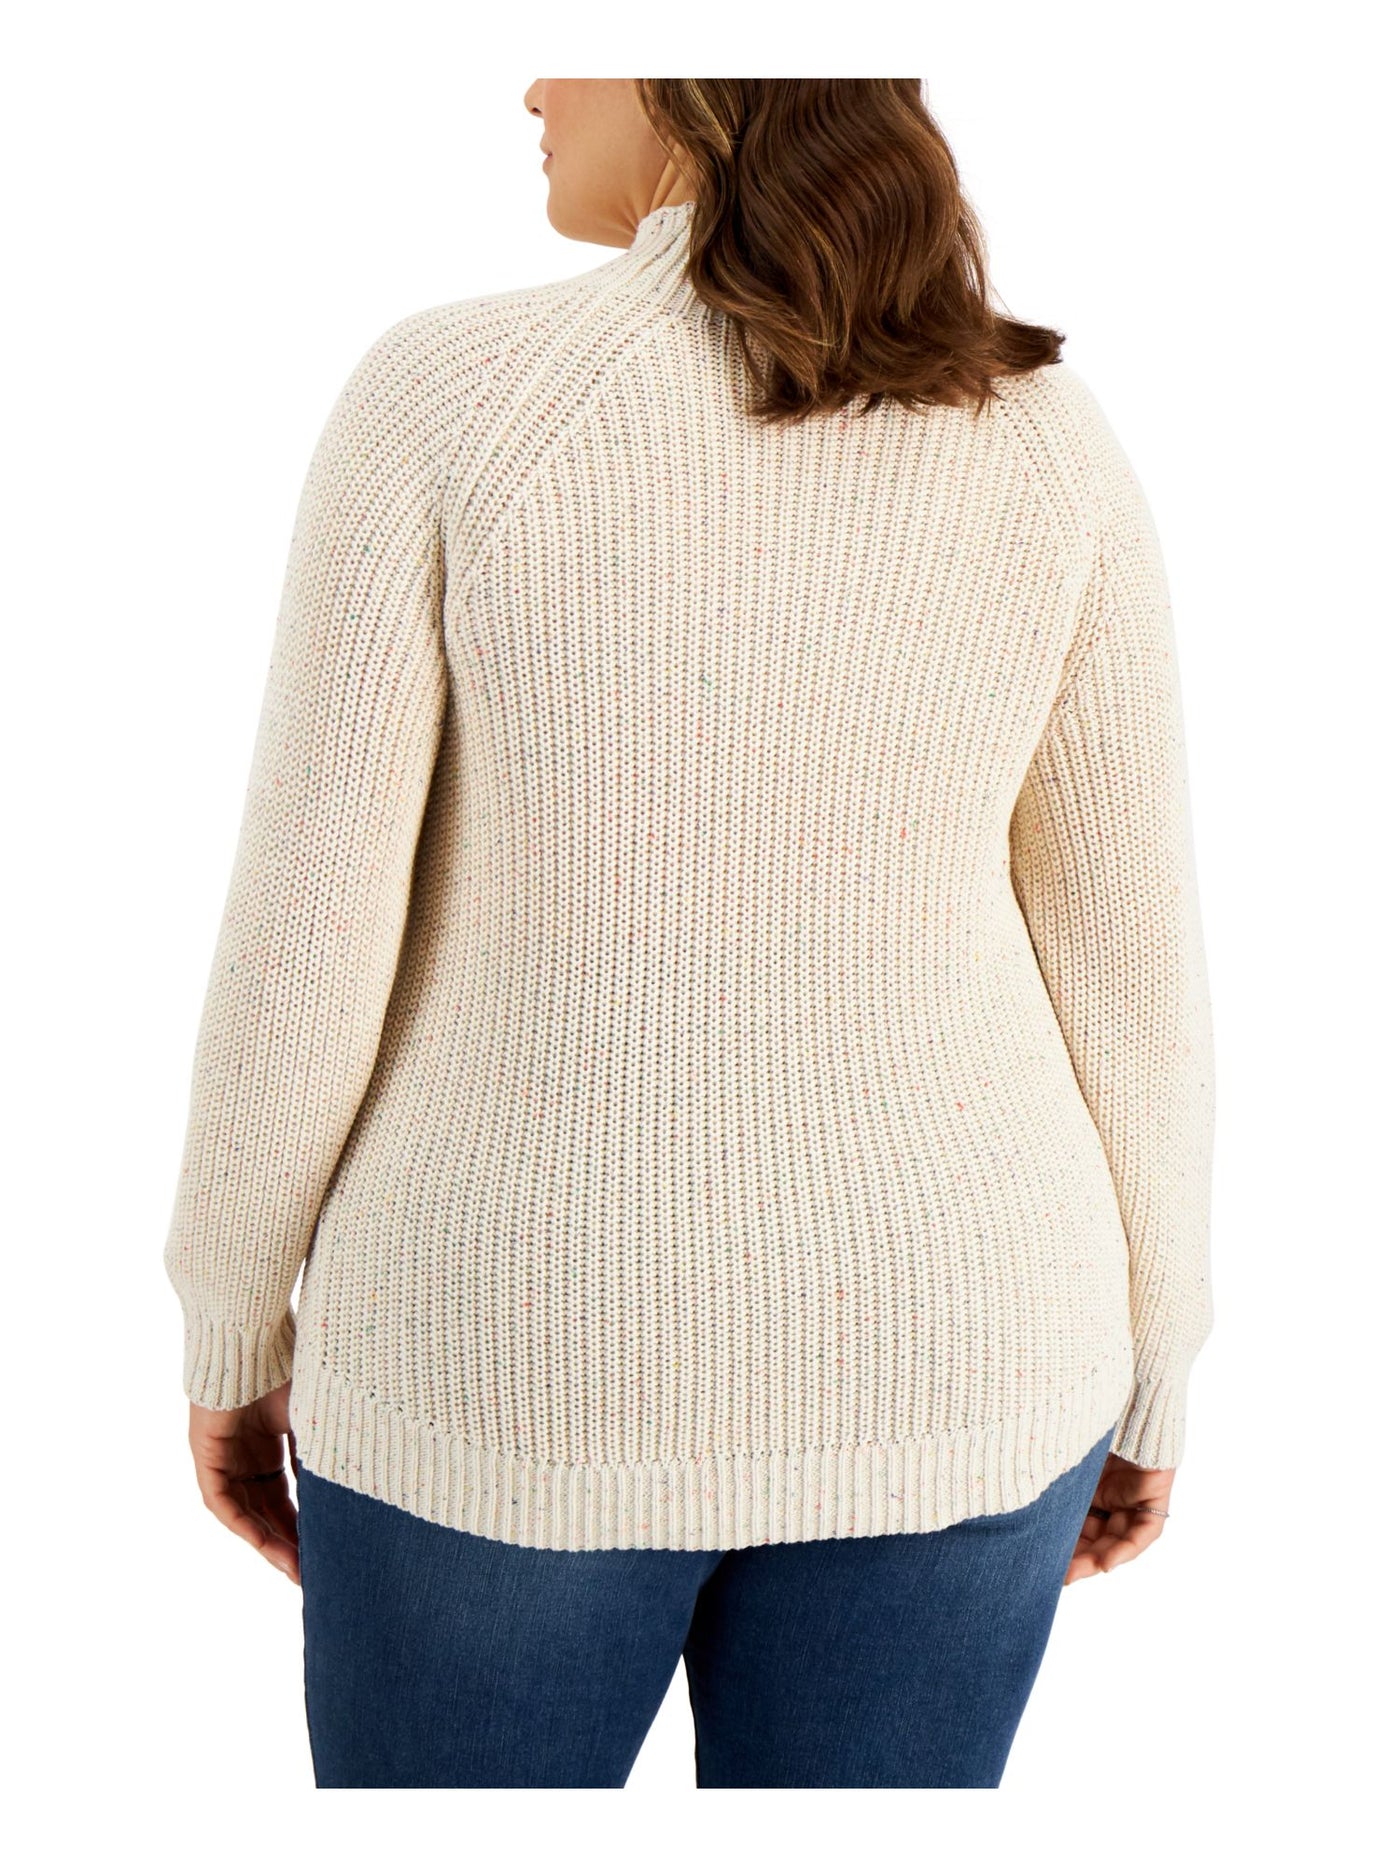 STYLE & COMPANY Womens Ivory Knit Ribbed Textured Funnel Neck Long Sleeve Sweater Plus 1X